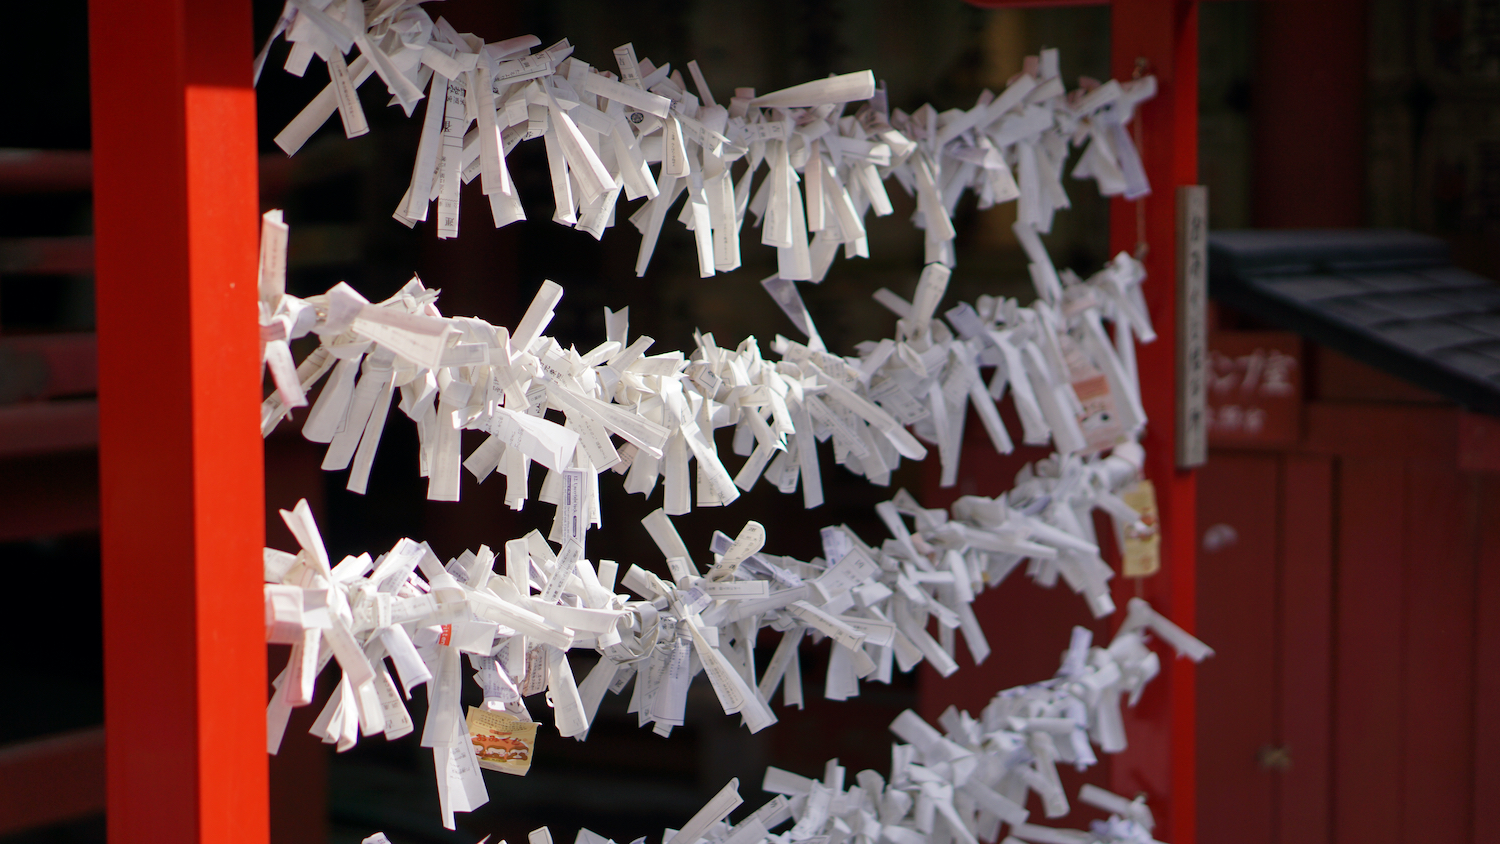 NIKKO, Japan - Jan 28, 2019: This is the Omikuji tie at Toshogu Shrine. The Omikuji tie is made to drive away bad luck, but if getting a good Omikuji, it's not necessary to tie it.